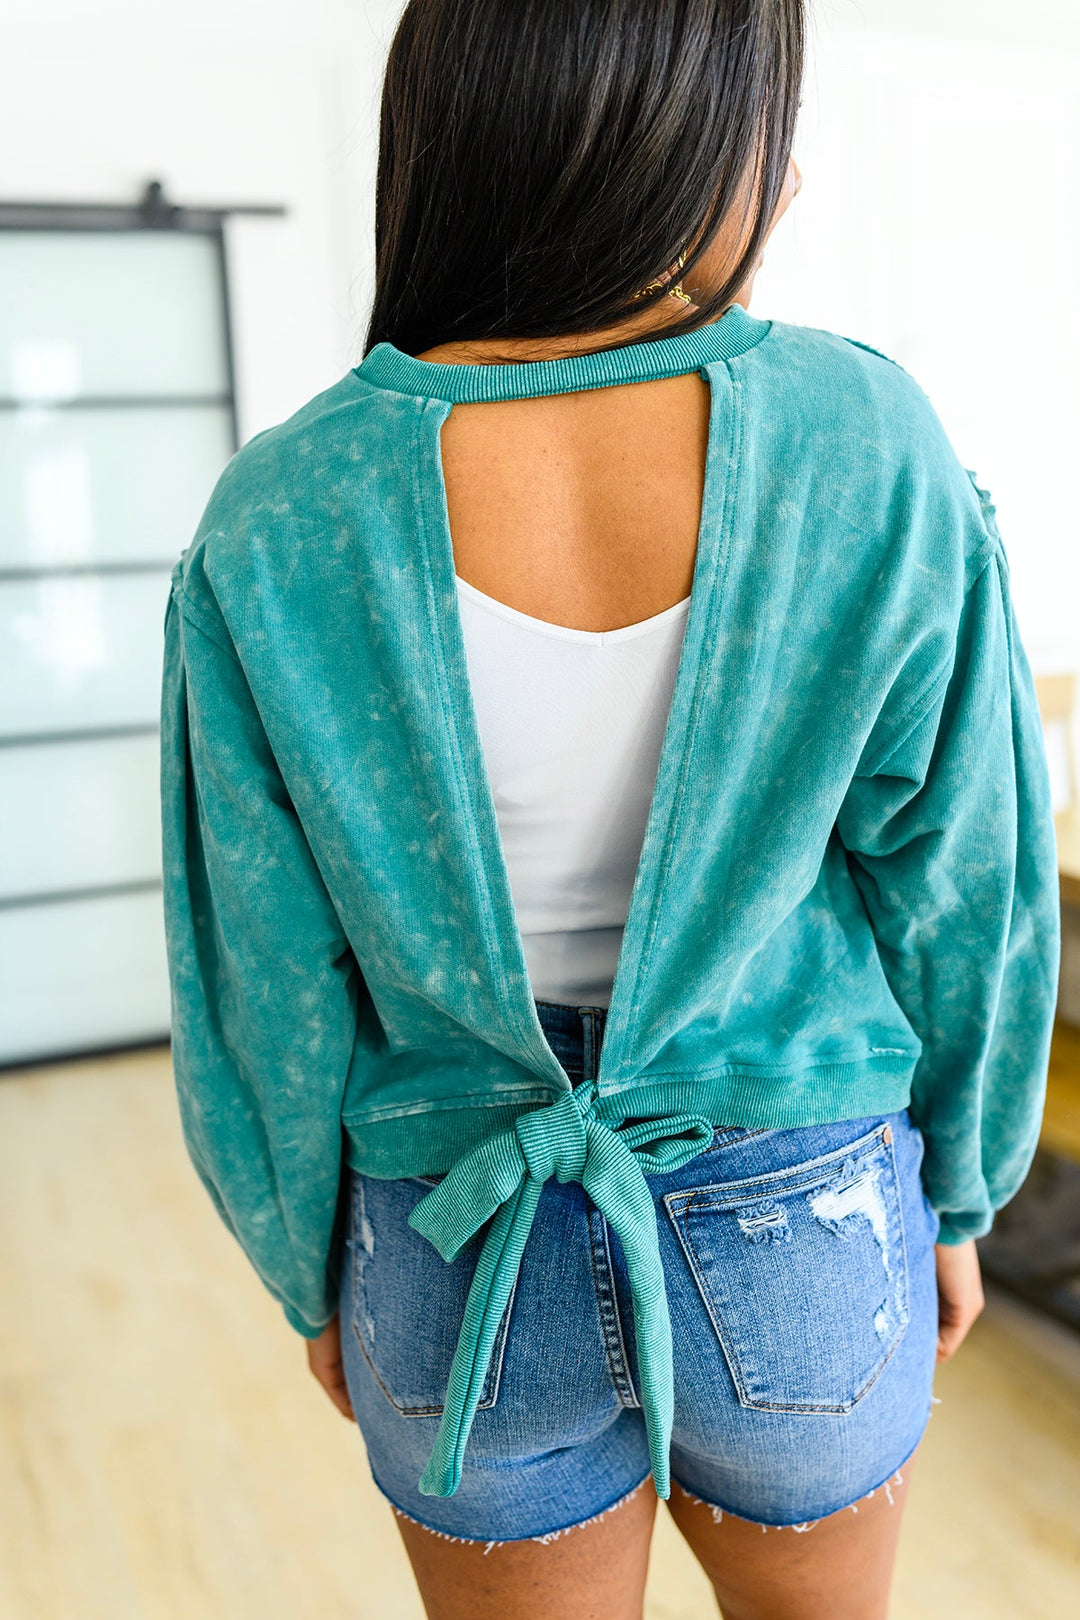 Tied Up In Cuteness Mineral Wash Sweater in Teal-Sweaters-Krush Kandy, Women's Online Fashion Boutique Located in Phoenix, Arizona (Scottsdale Area)